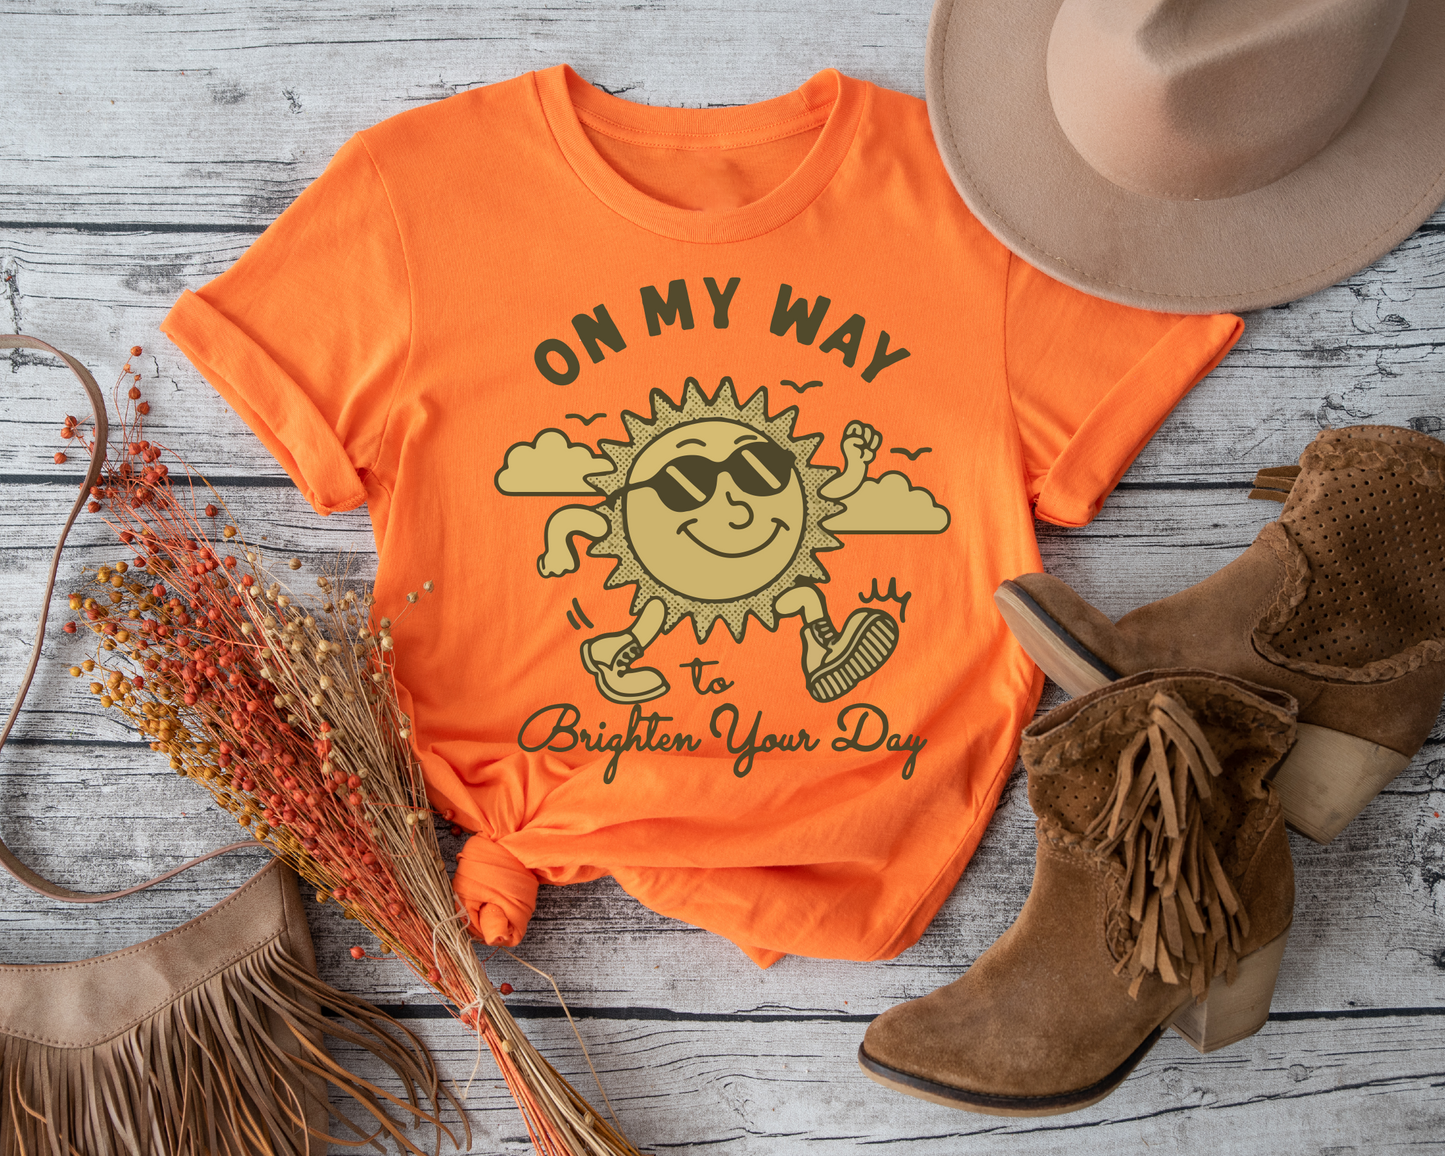 Spread a little sunshine wherever you go with our "Shirt On My Way To Brighten Your Day" T-Shirt, the perfect way to add a touch of positivity and cheer to your everyday wardrobe.